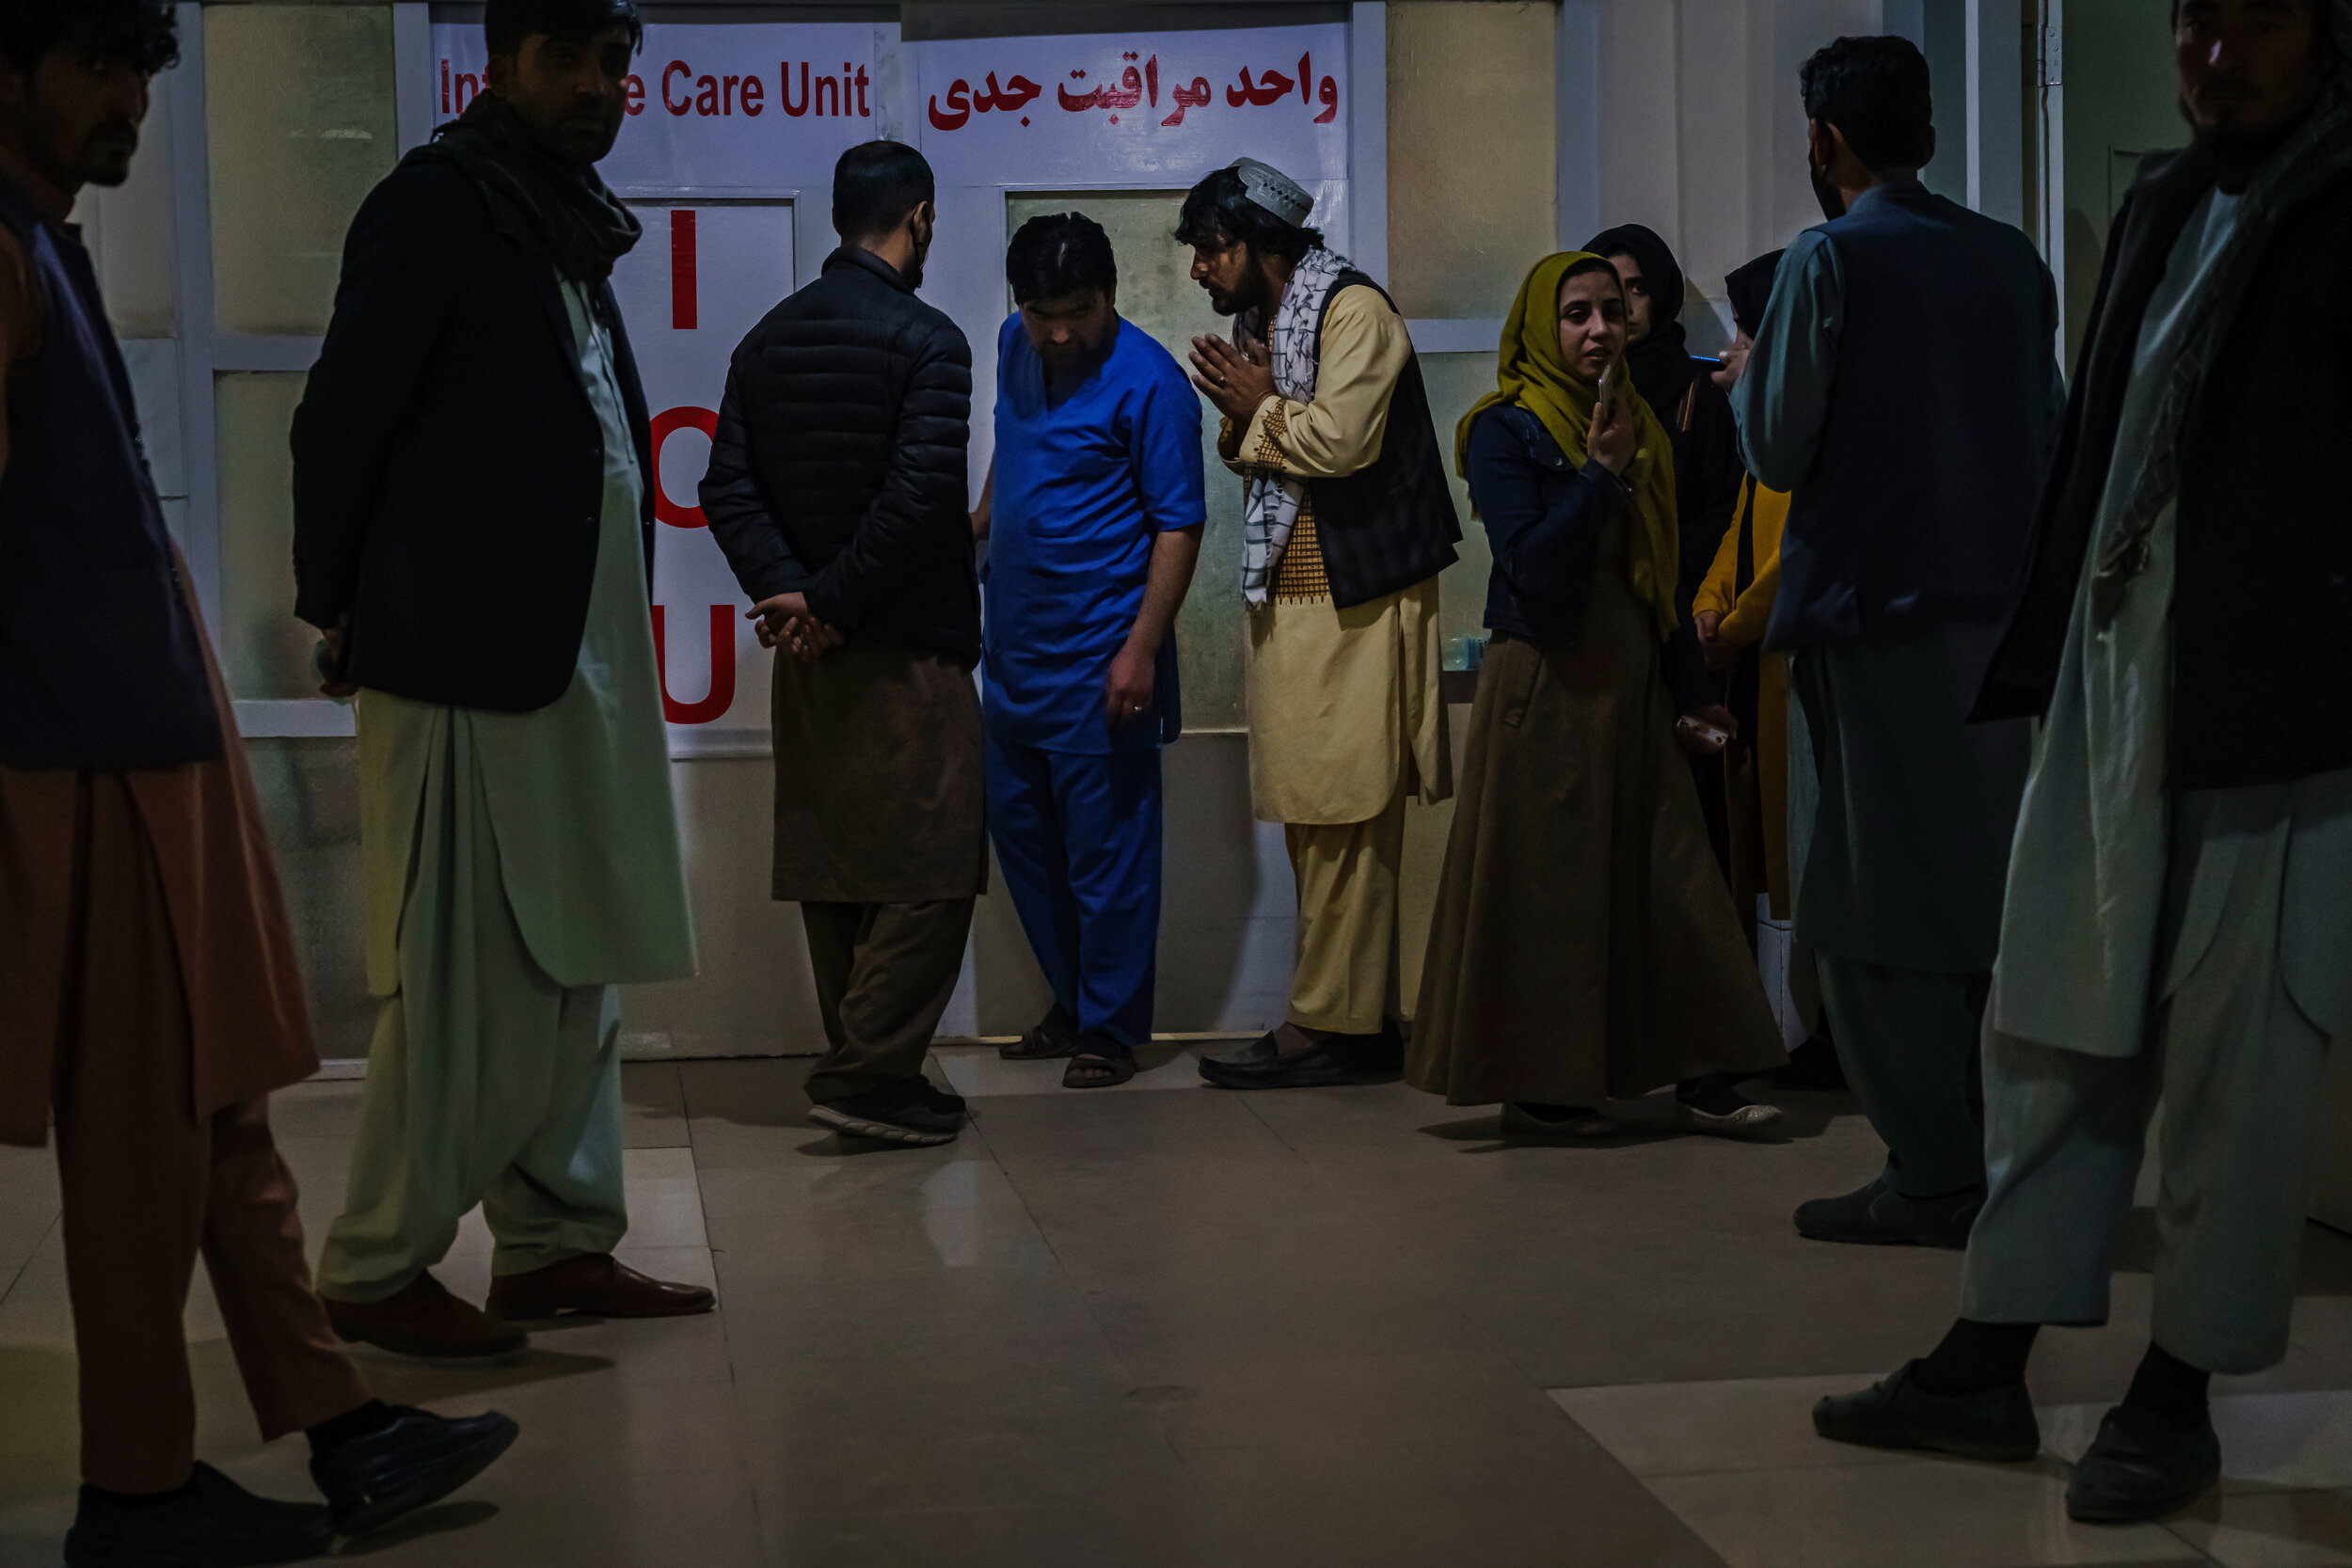  At Ali Abad Hospital, family members beg officials to be reunited with their loved ones, after casualties were rushed to local hospitals after a recent attack on Kabul University, Afghanistans largest university, where three gunmen fired weapons and